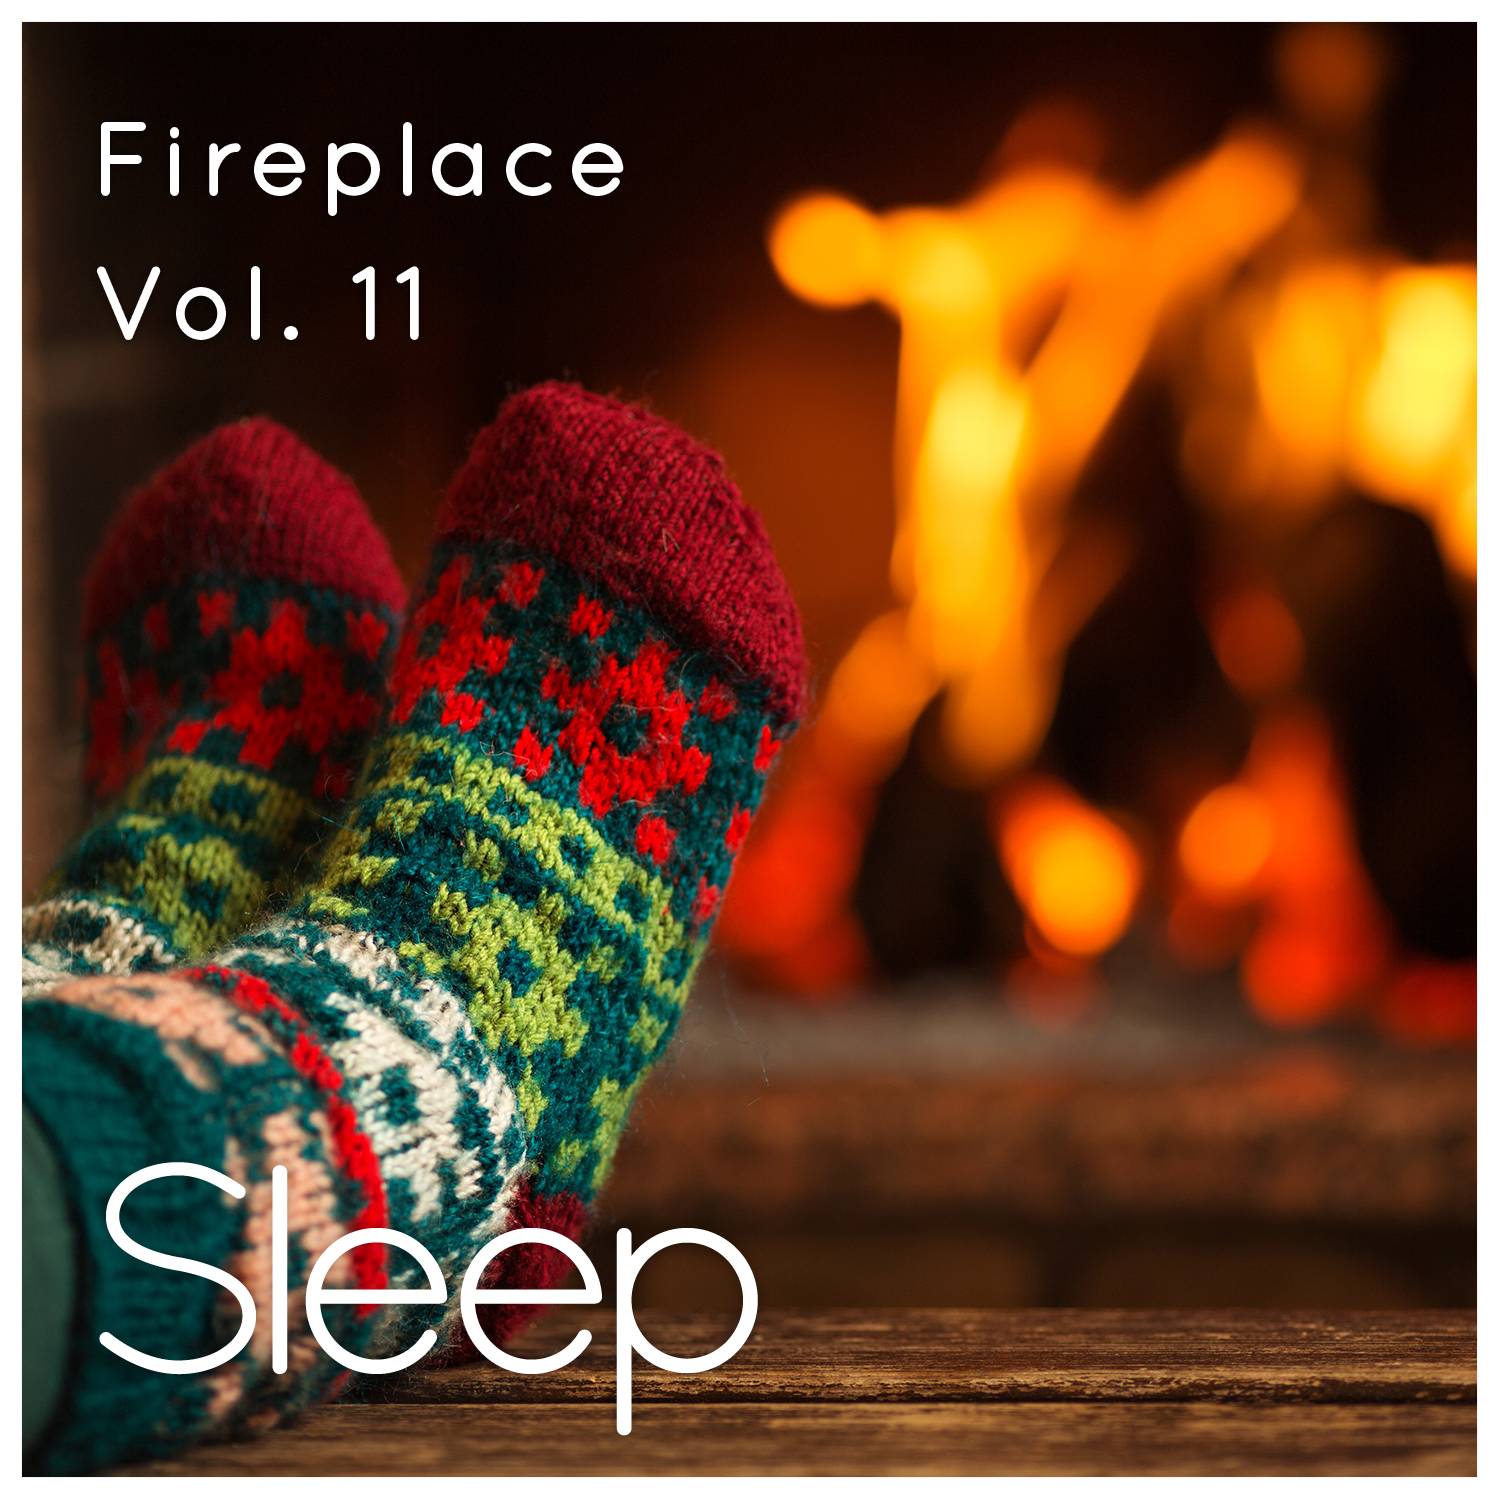 Sleep by Fireplace in Cabin, Vol. 11